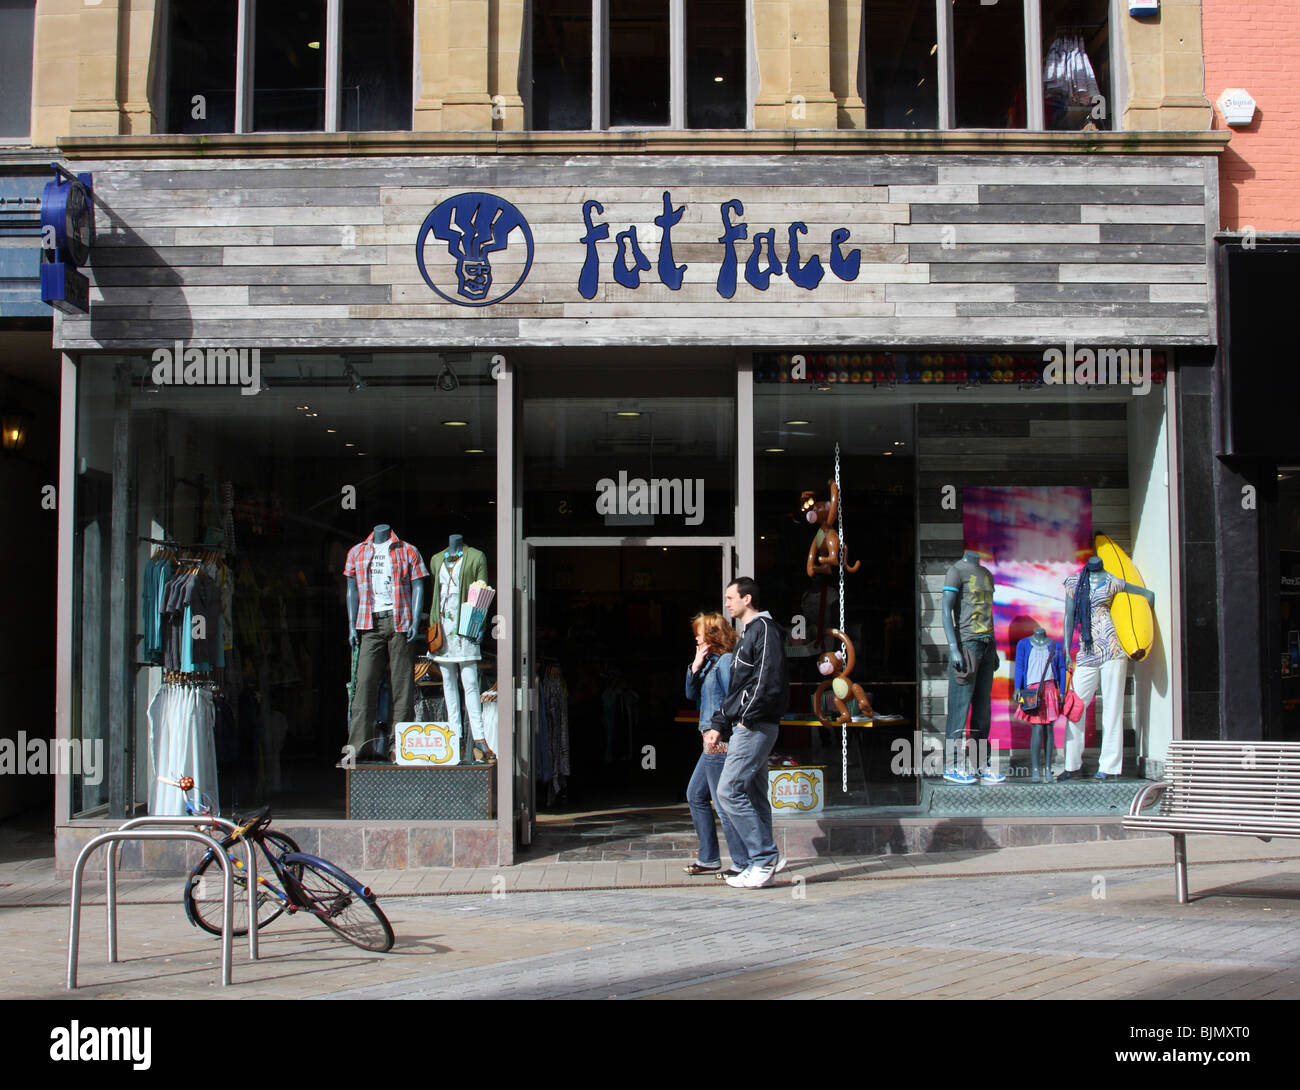 A Fat Face retail fashion outlet in Leeds, England, U.K. Stock Photo